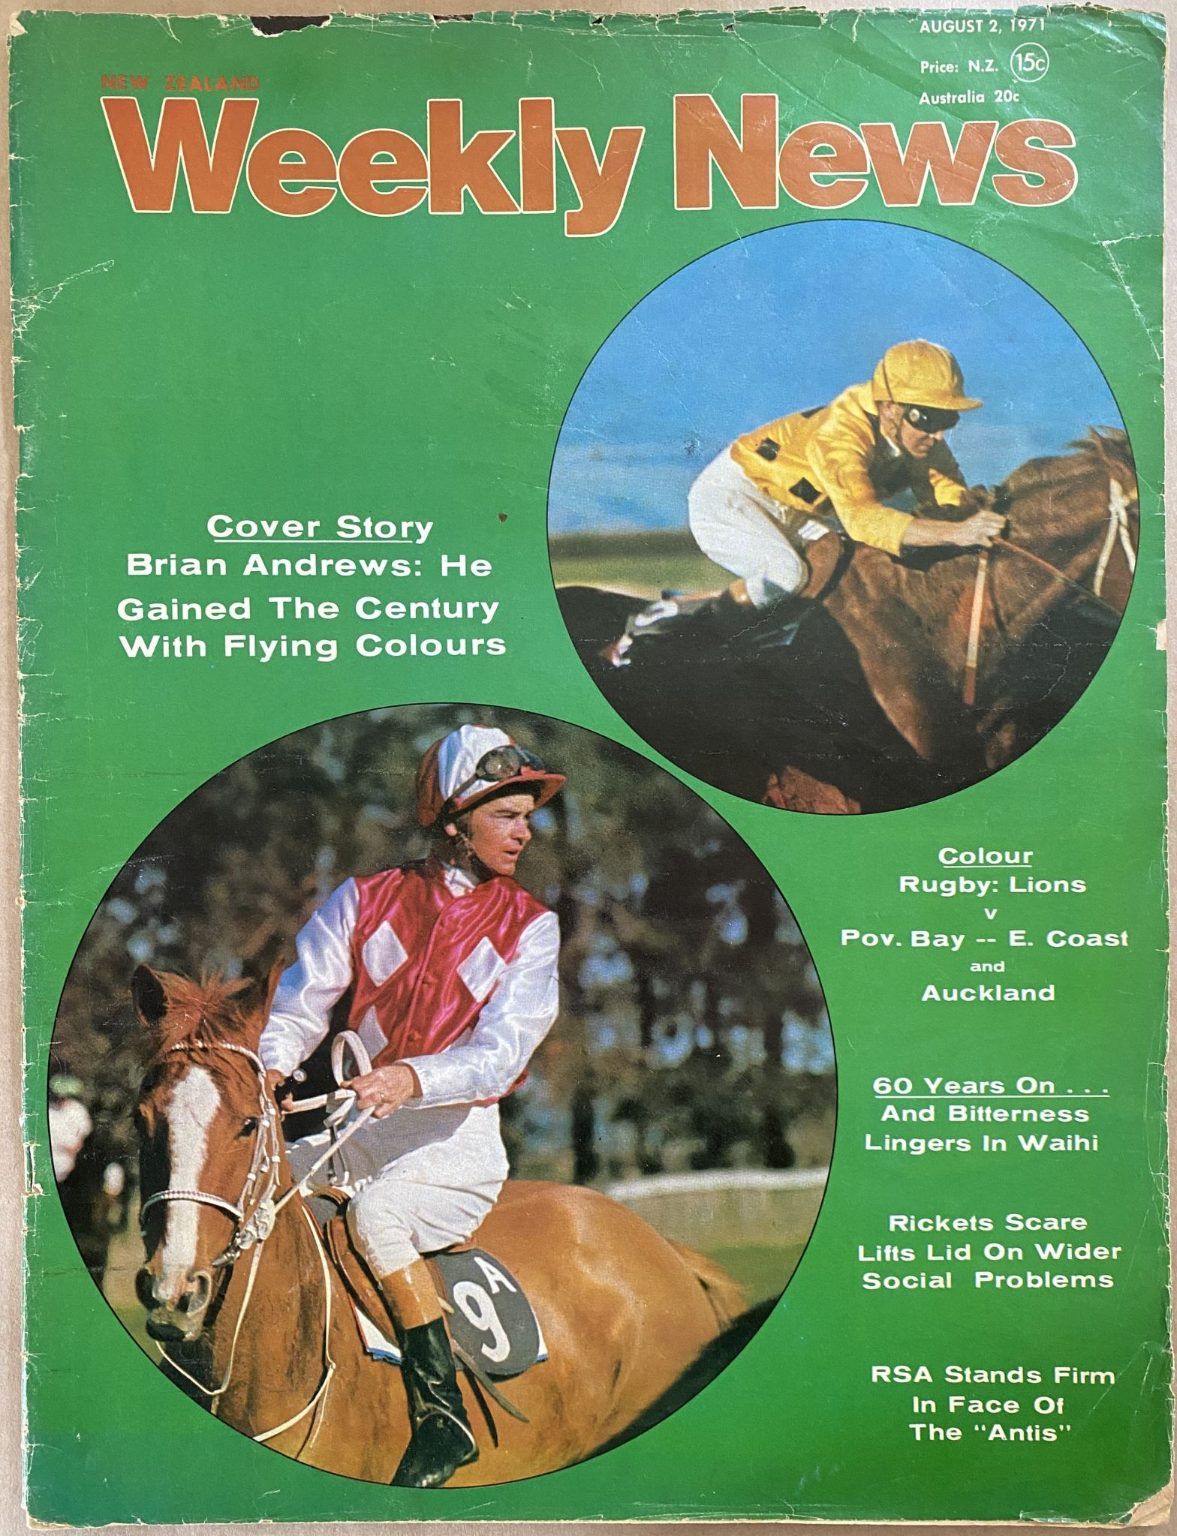 OLD NEWSPAPER: New Zealand Weekly News, No. 5616, 2 August 1971